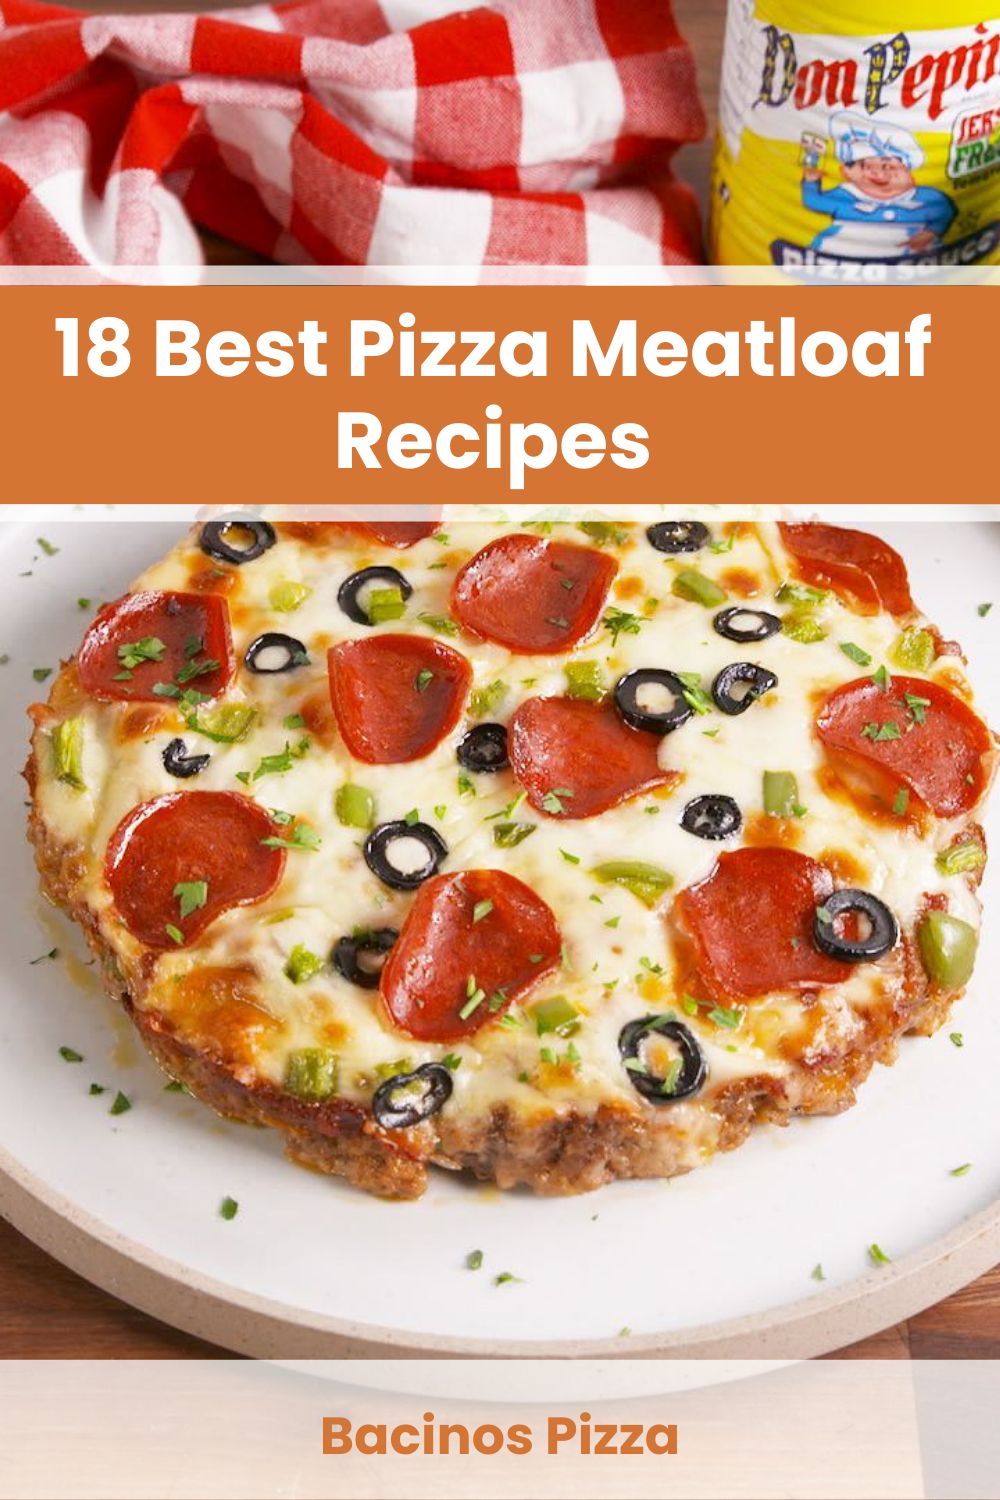 Pizza Meatloaf Recipes